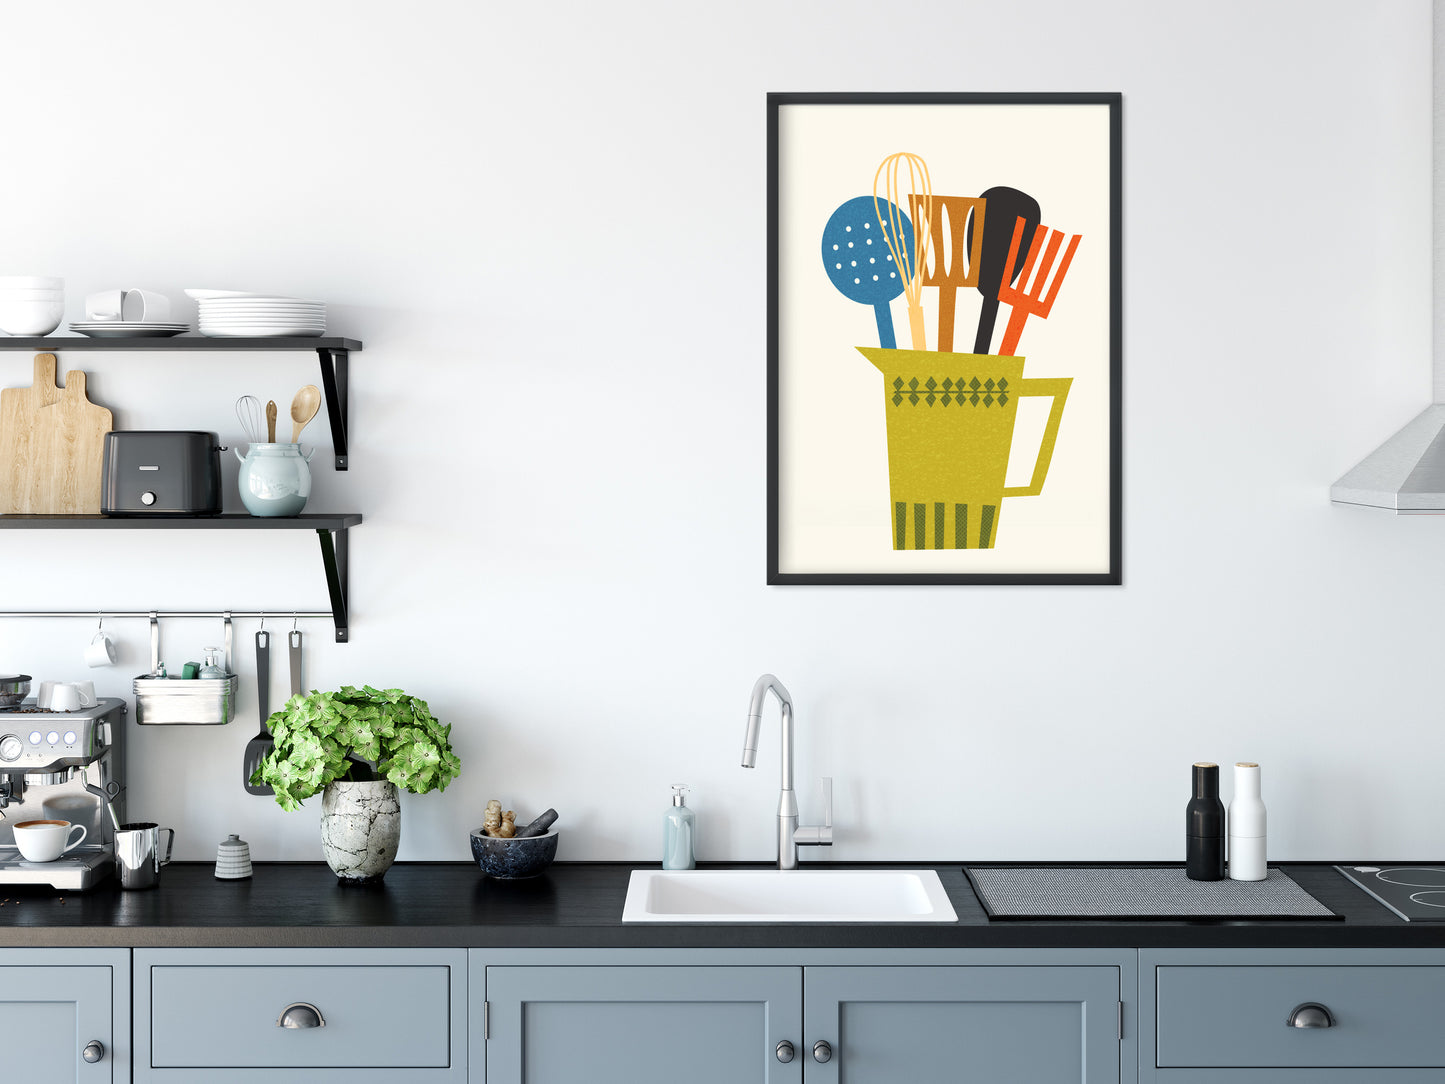 Kitchen wall art print in a mid century modern style with kitchen utensils in a retro jug